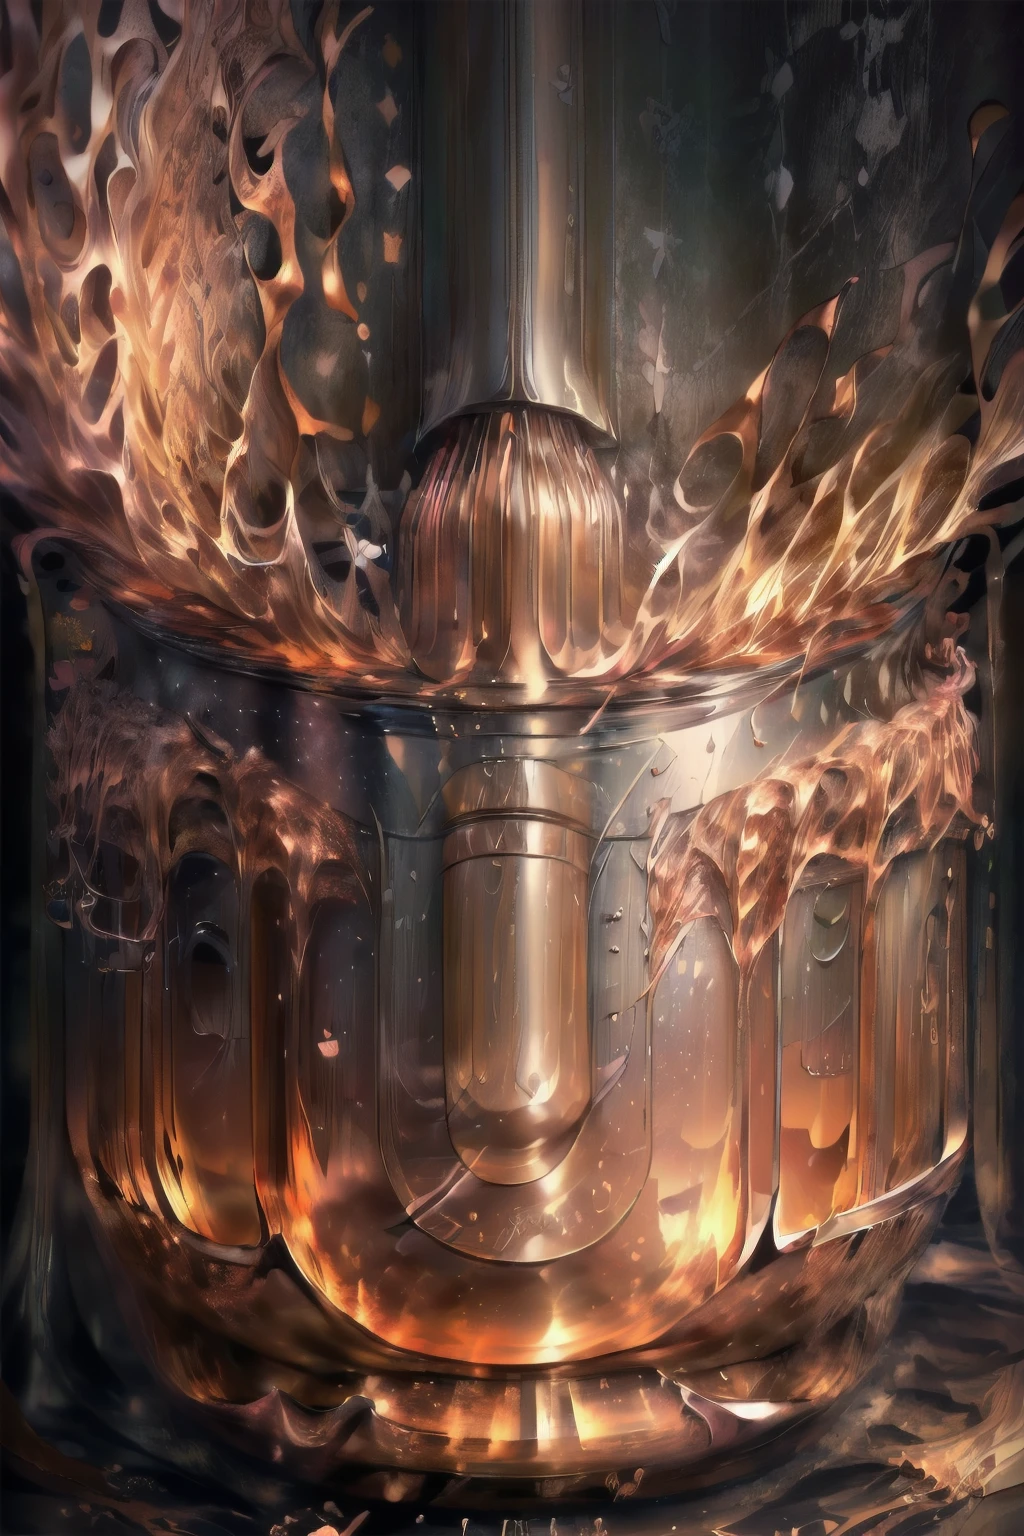 ((masterpiece, highest quality, Highest image quality, High resolution, photorealistic, Raw photo, 8K)), ((Extremely detailed CG unified 8k wallpaper)), Liquid metal flowing out of a broken container, swirling and gathering on the floor, solidifying into the shape of a person,